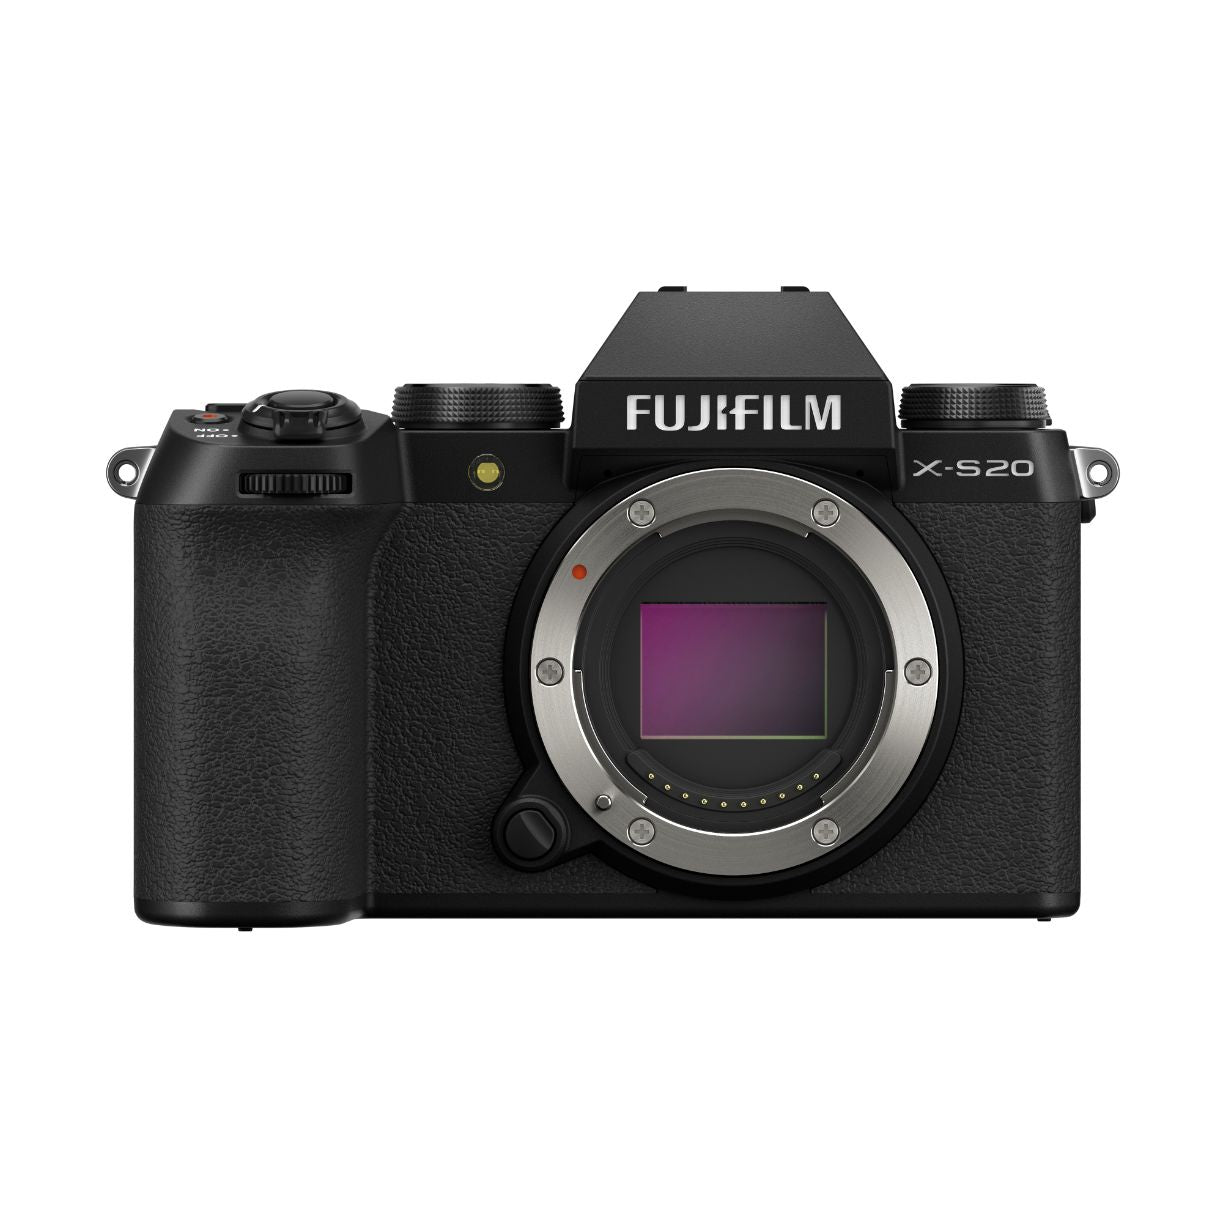 Product Image of Fujifilm X-S20 mirrorless camera body only - black